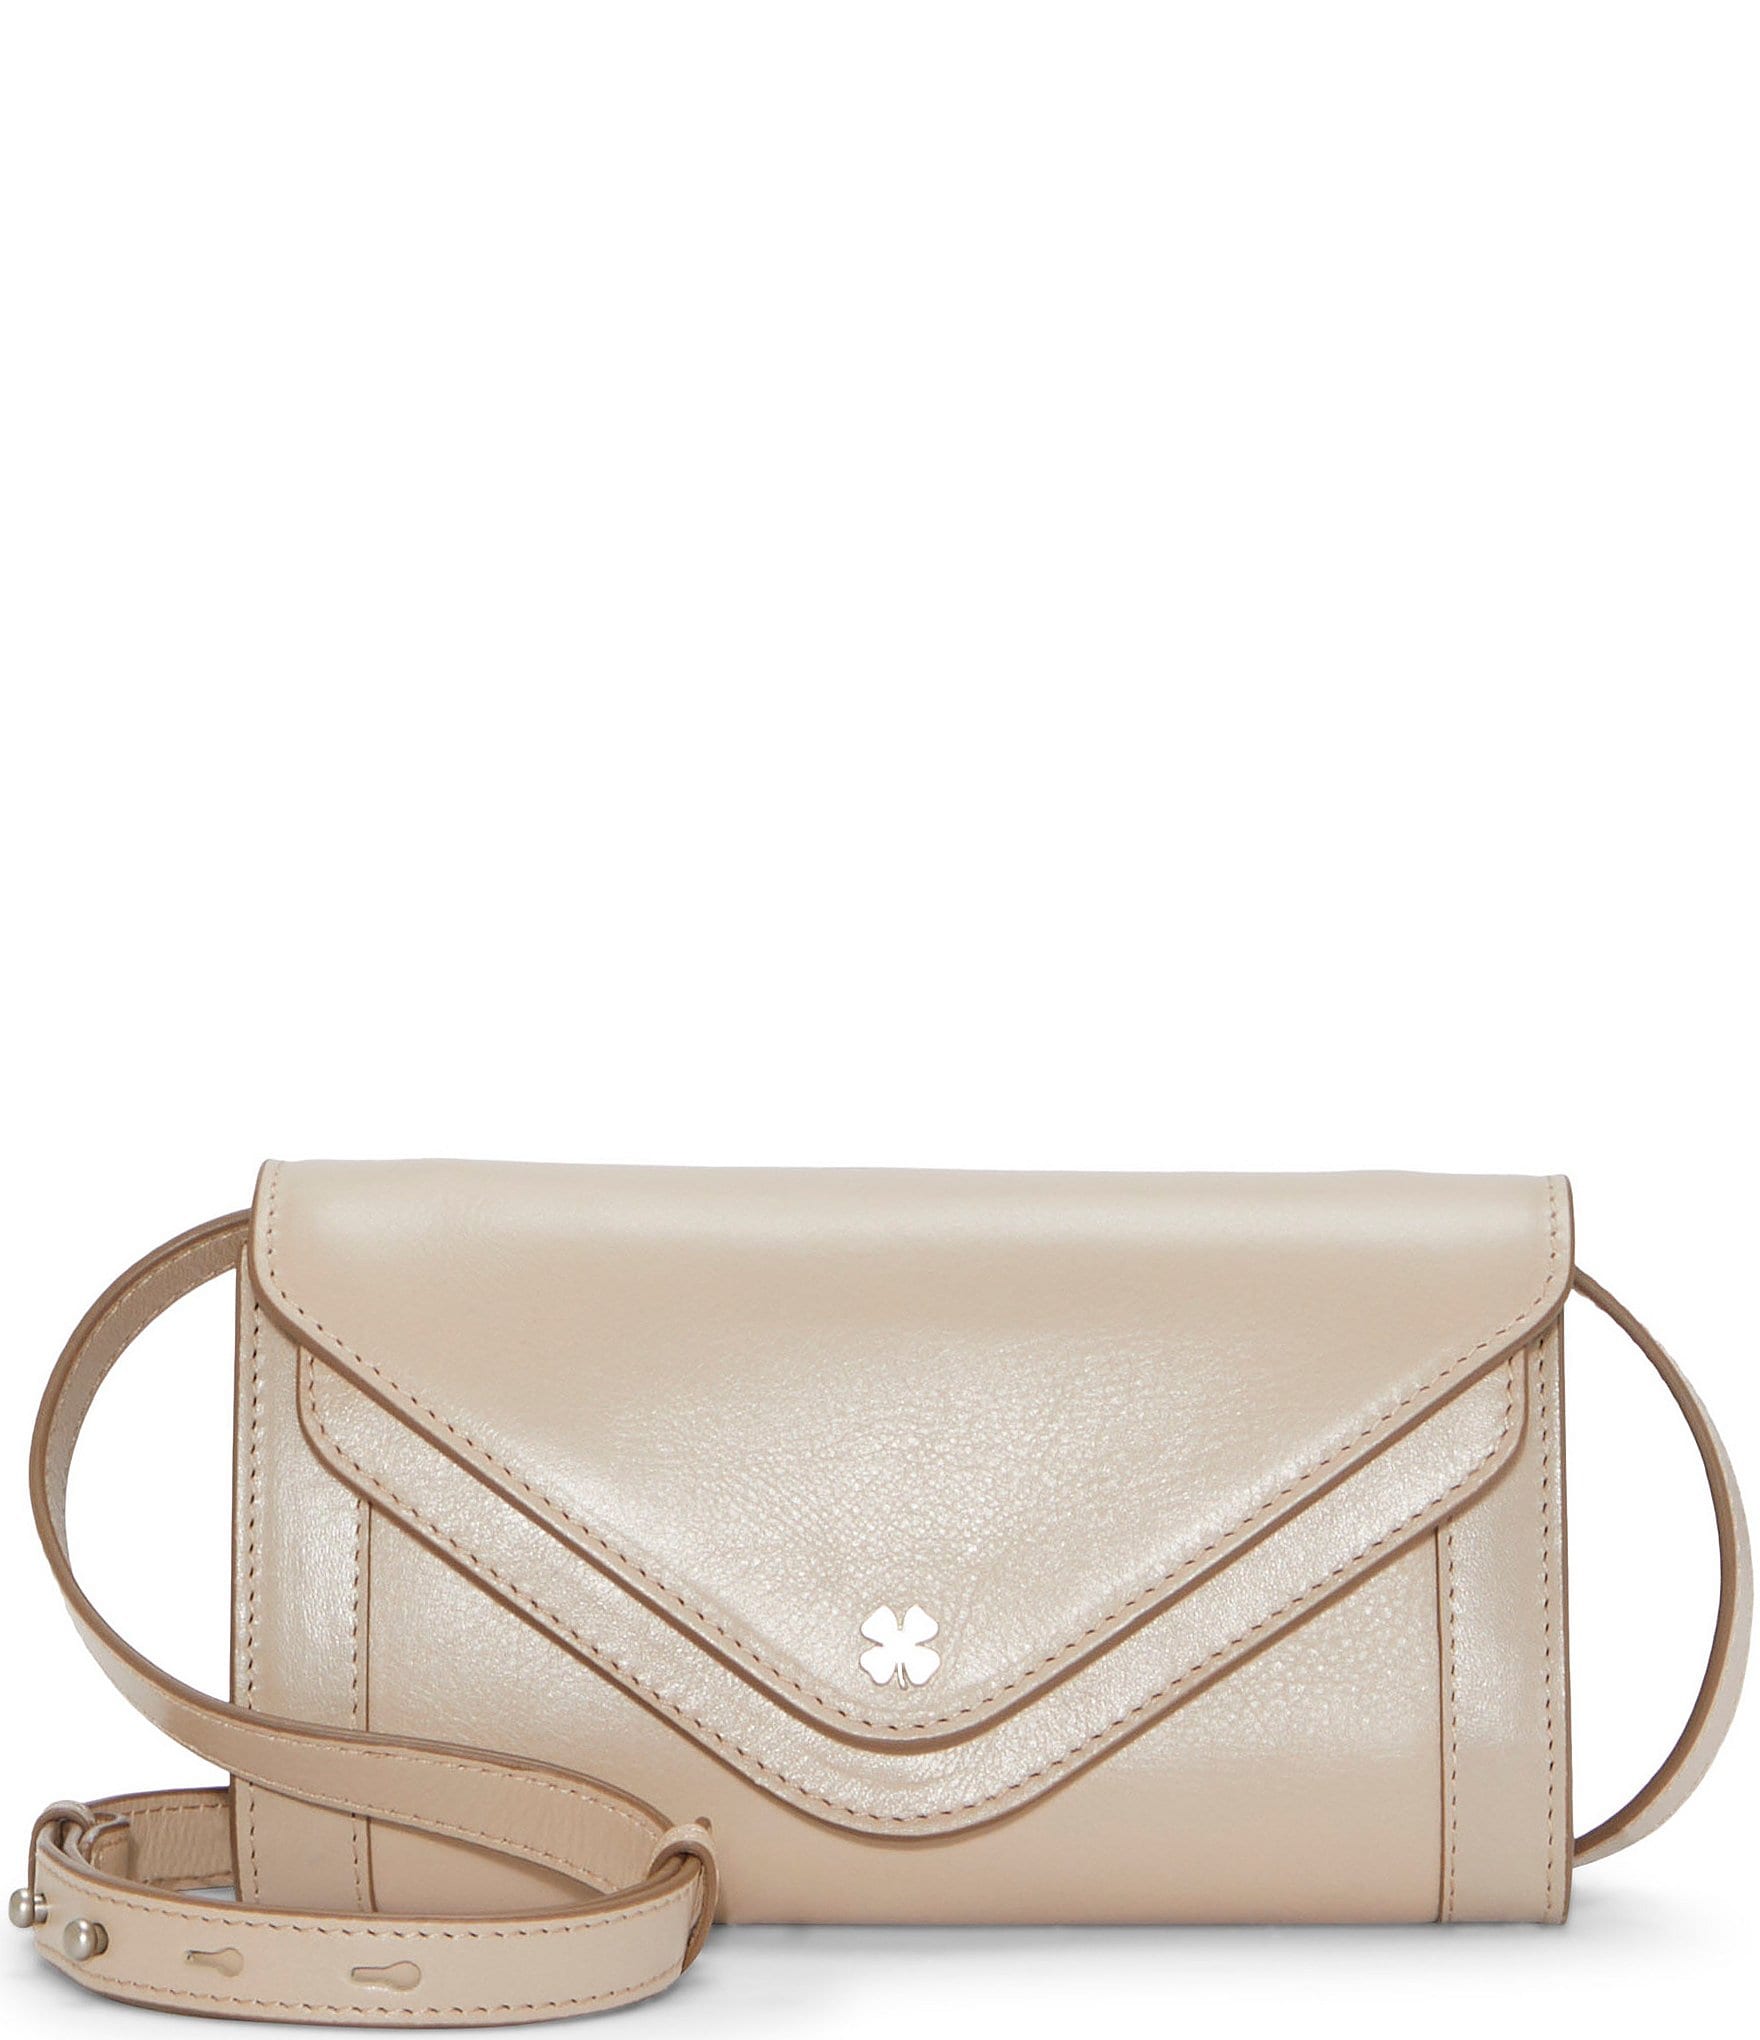 New purses, Lucky brand. Via Spiga - clothing & accessories - by owner -  apparel sale - craigslist